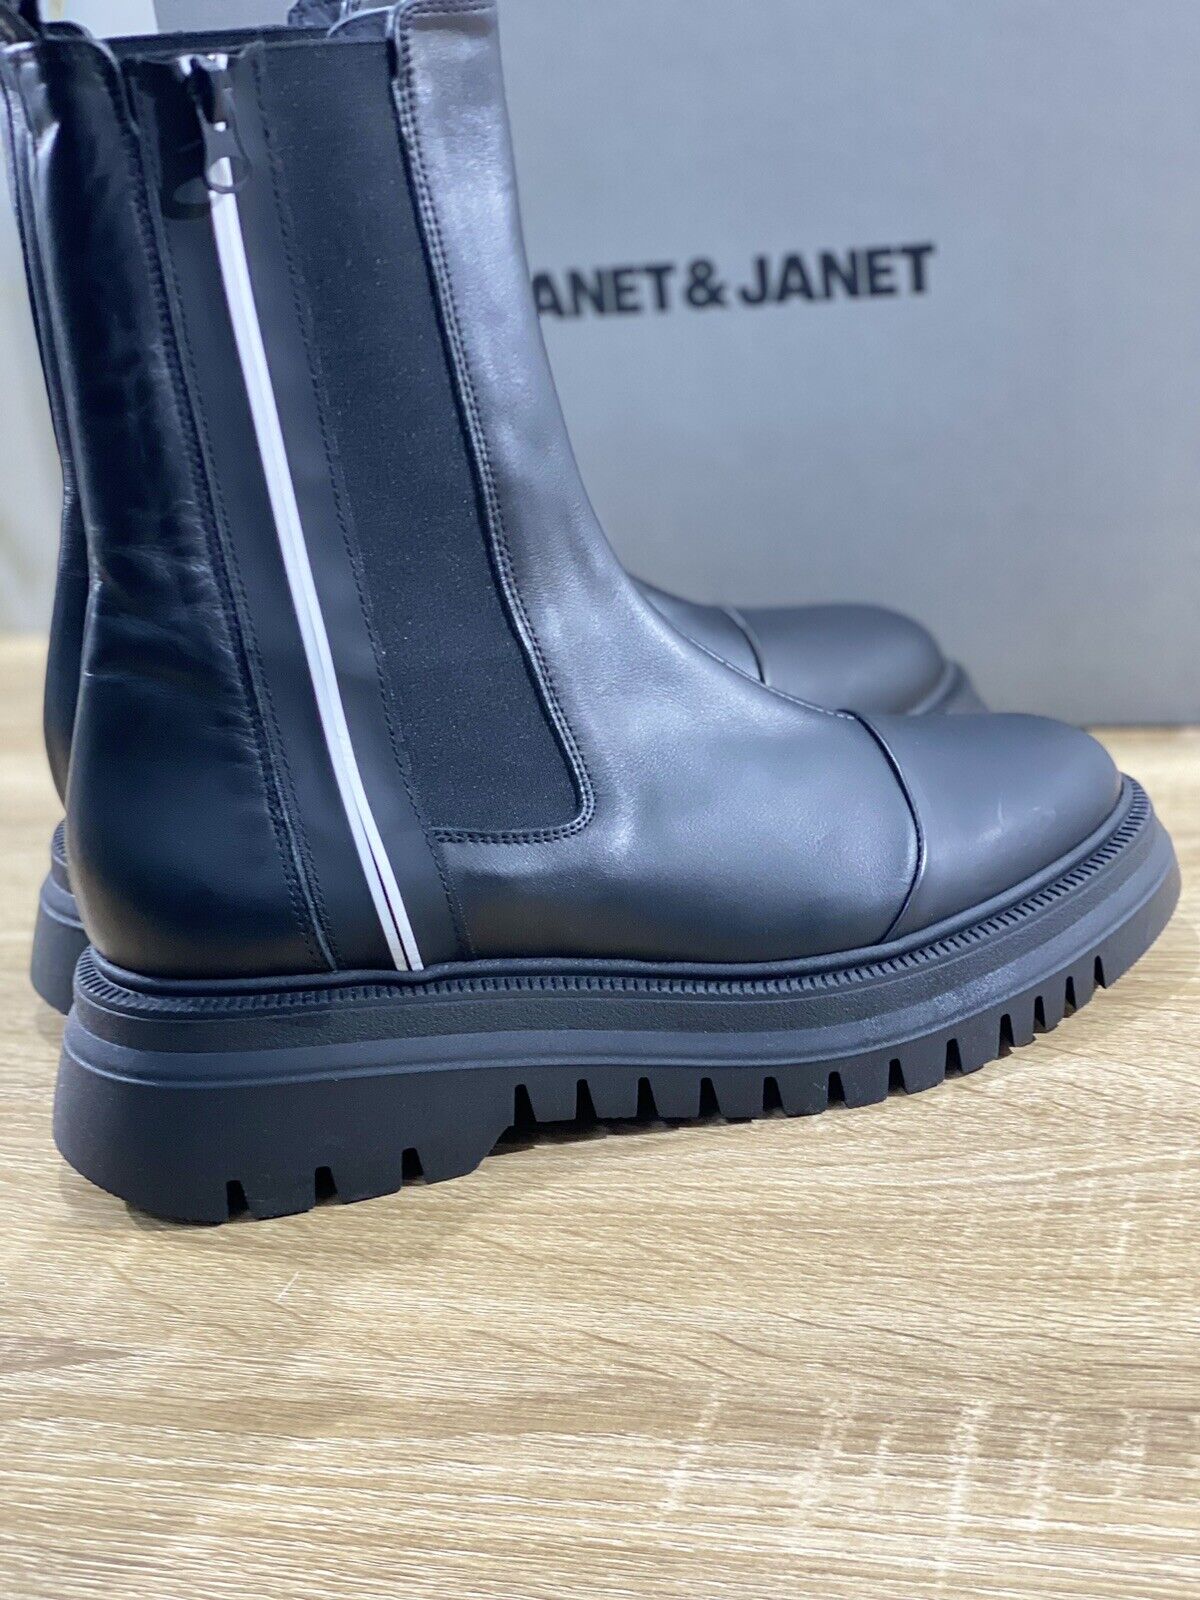 Janet & Janet Stivaletto Donna Combat Boot Pelle Nero Extra Light 40